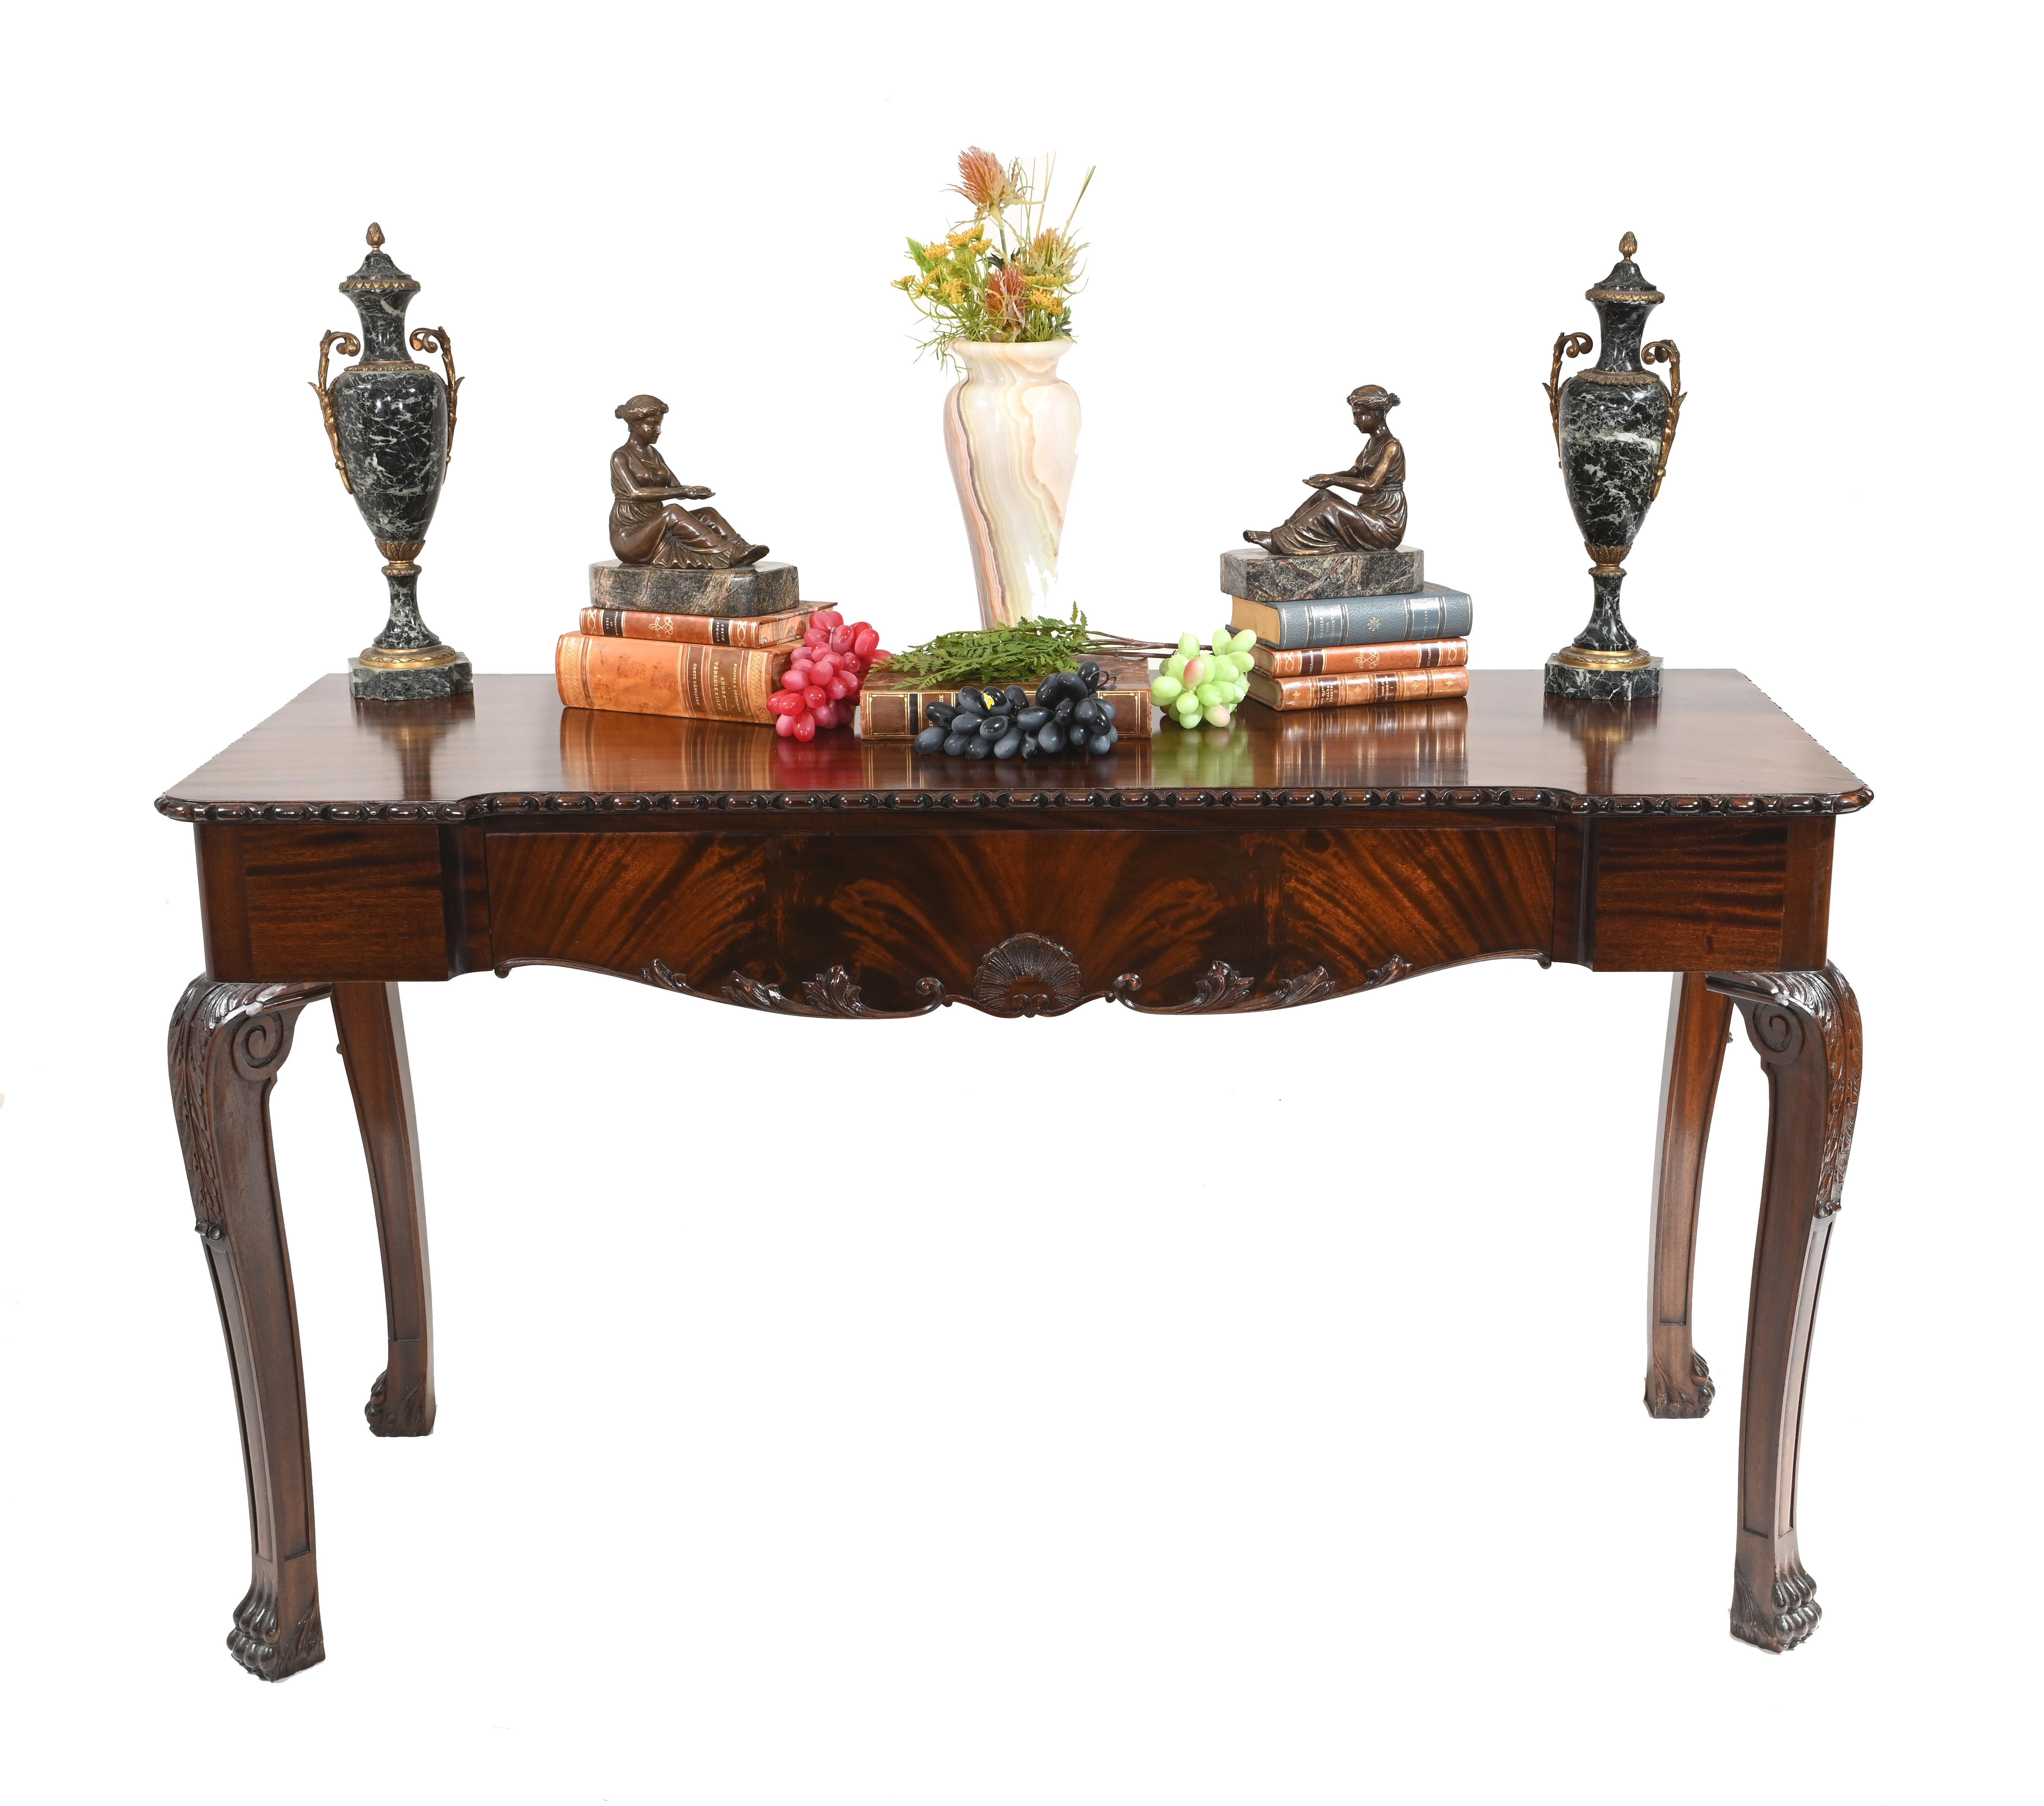 Wonderful antique mahogany serving table or buffet
In the style of Gillows and Co and circa 1880
Great looking piece of antique furniture
Some of our items are in storage so please check ahead of a viewing to see if it is on our shop